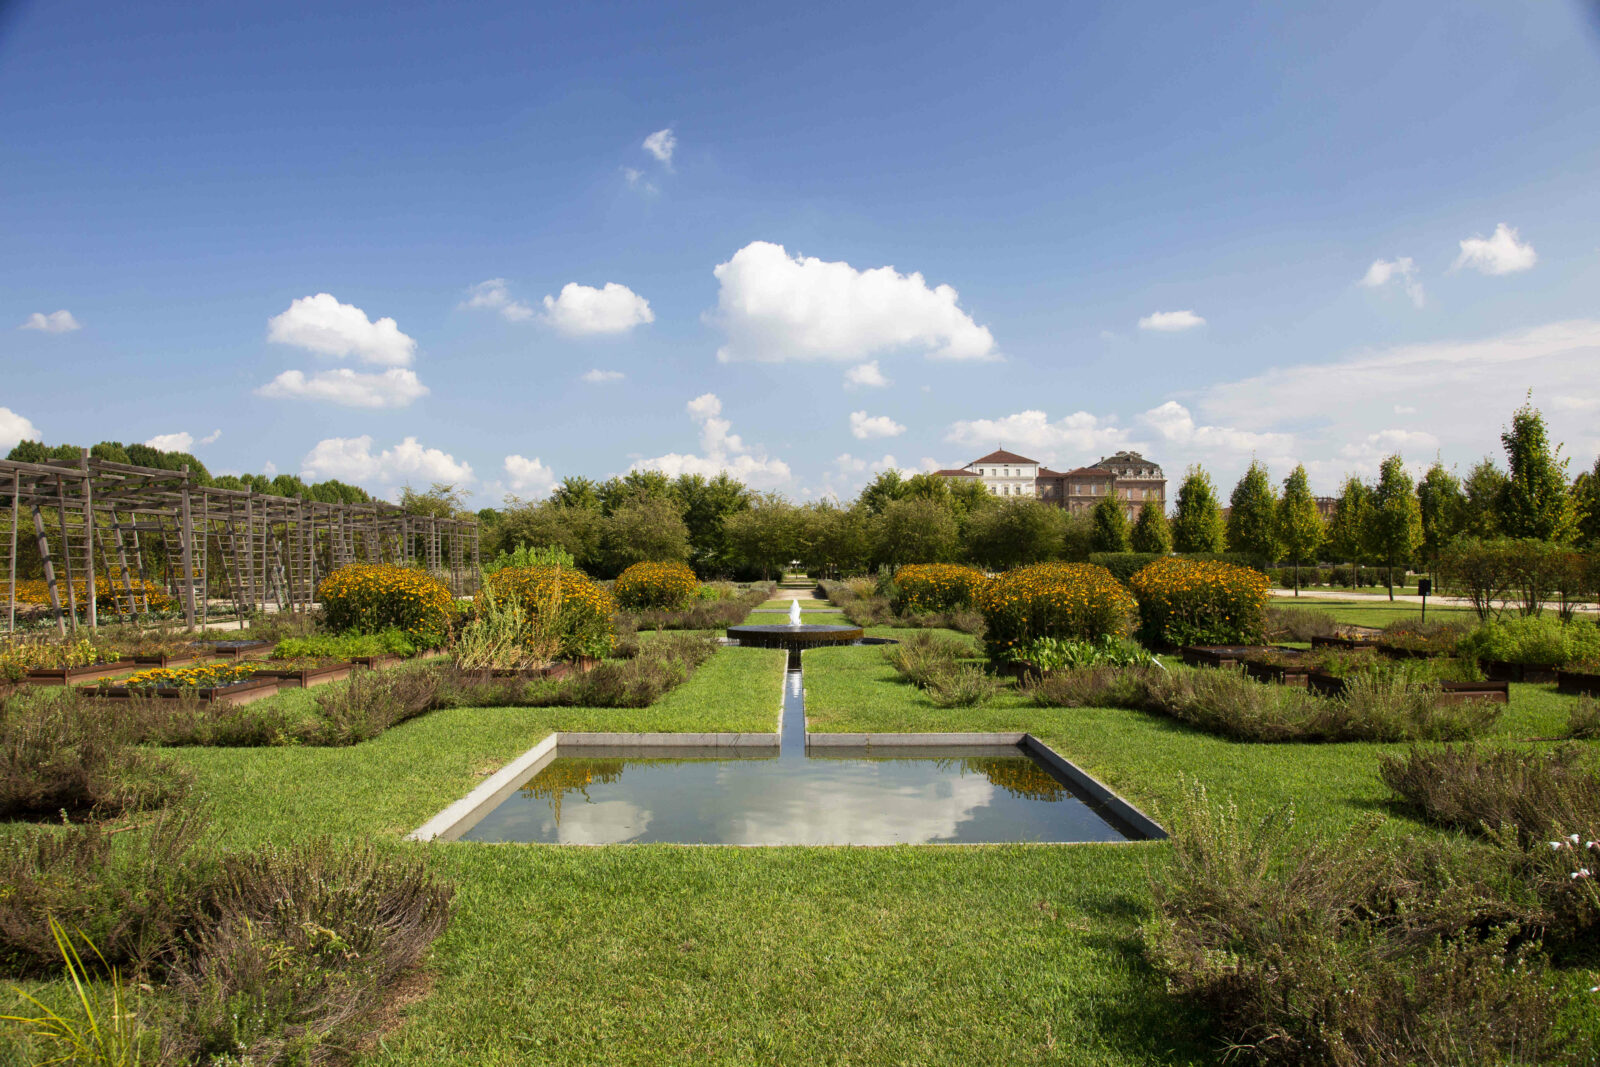 View of the garden at the Realm of Venaria